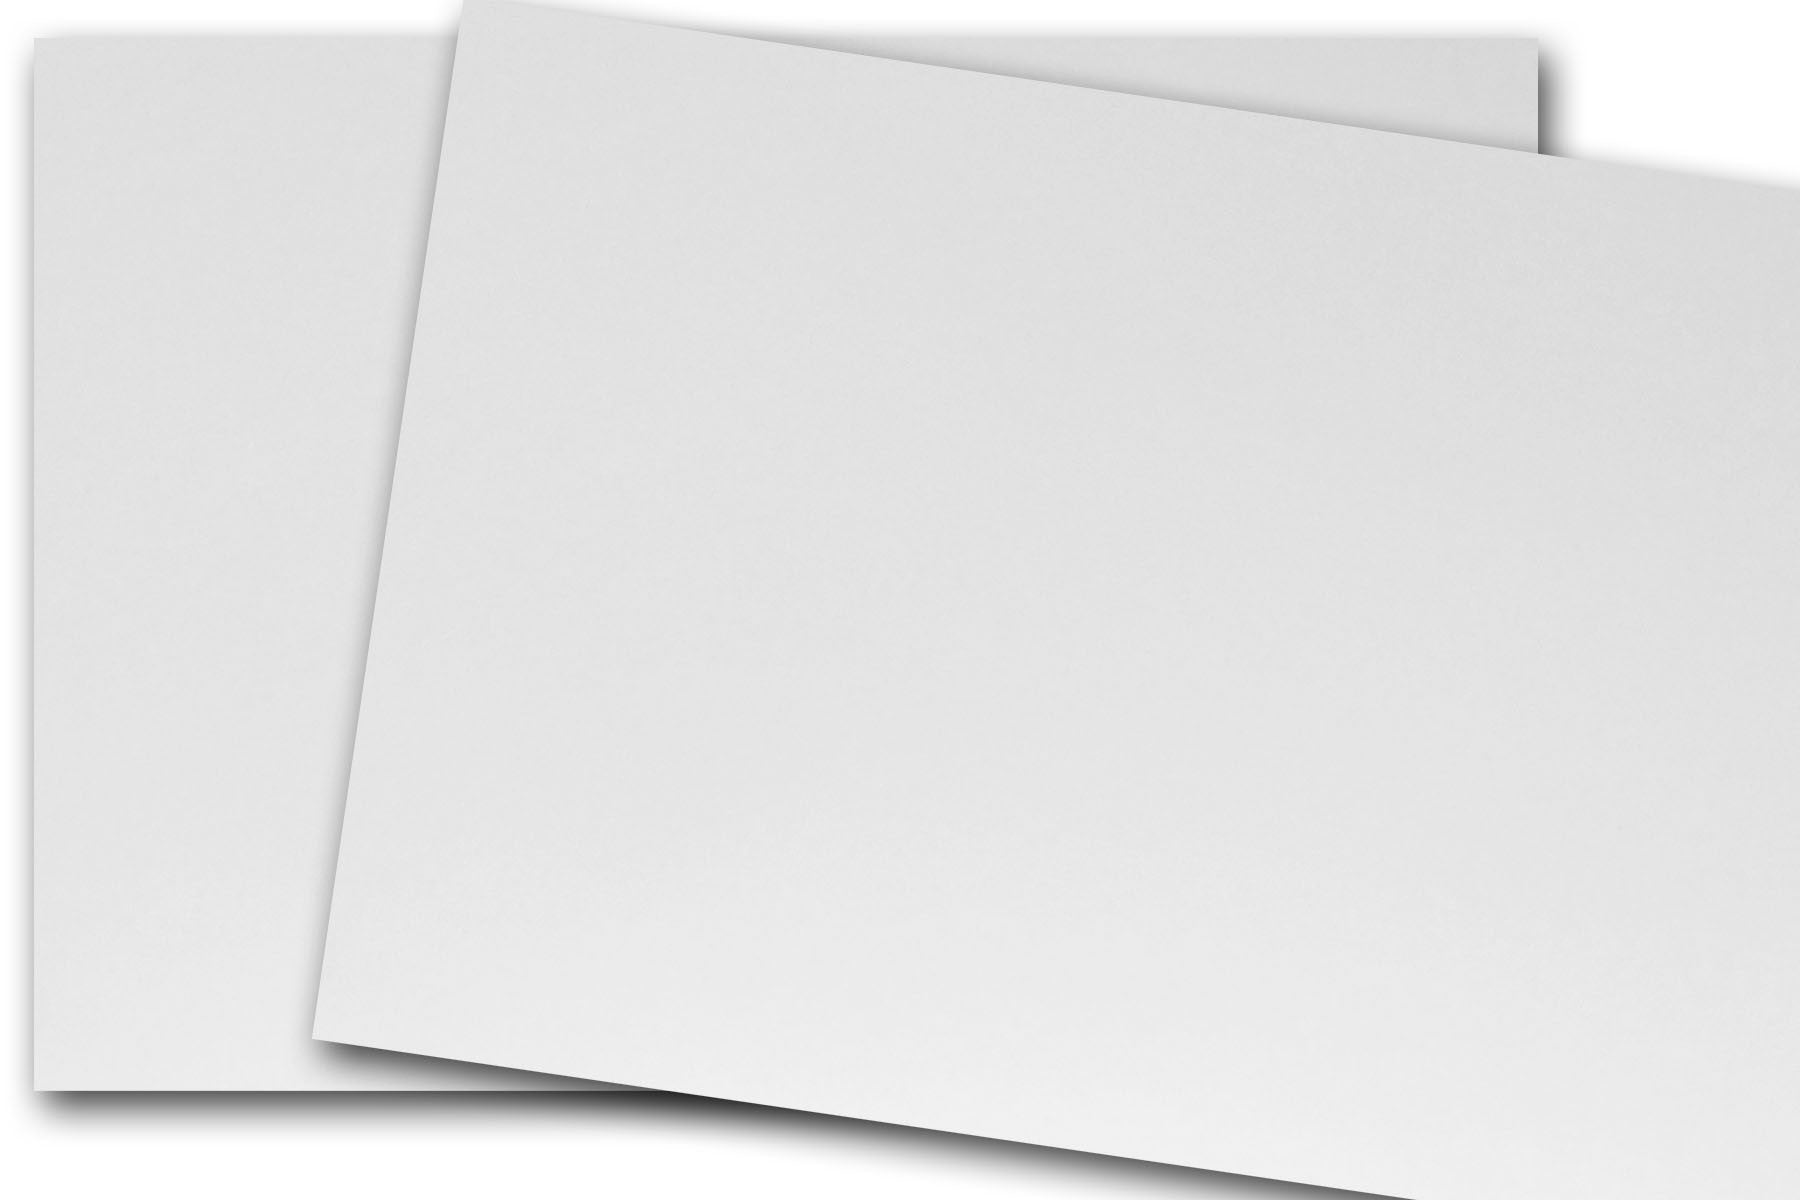 CLASSIC CREST 8.5 x 11 Cardstock Paper - Recycled 100 Bright White - 80lb C